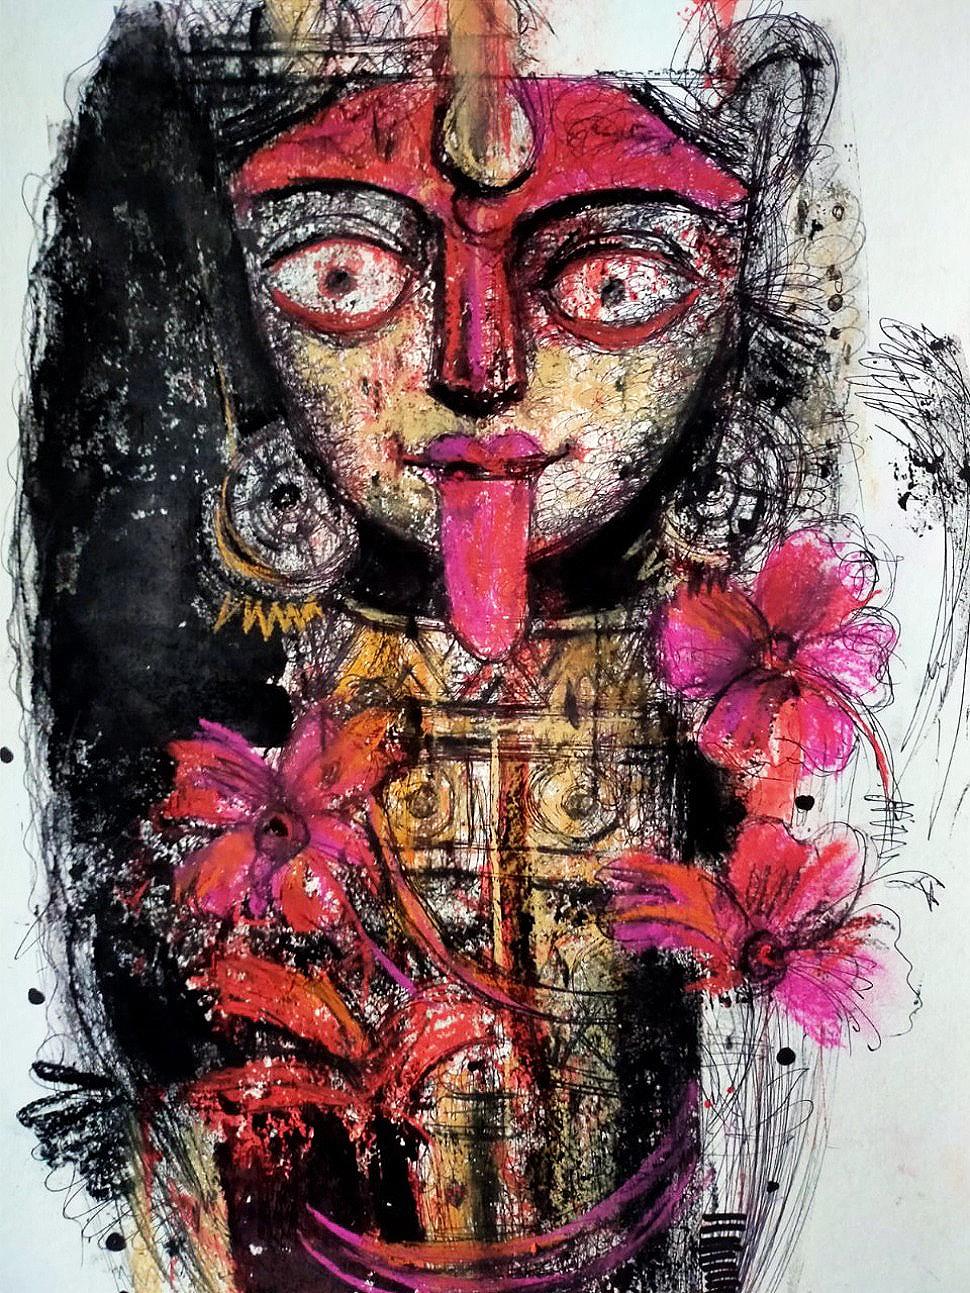 Maa Kali, Mixed Media on Paper, Red, Pink, Black by Contemporary Artist-In Stock - Mixed Media Art by Sekhar Kar